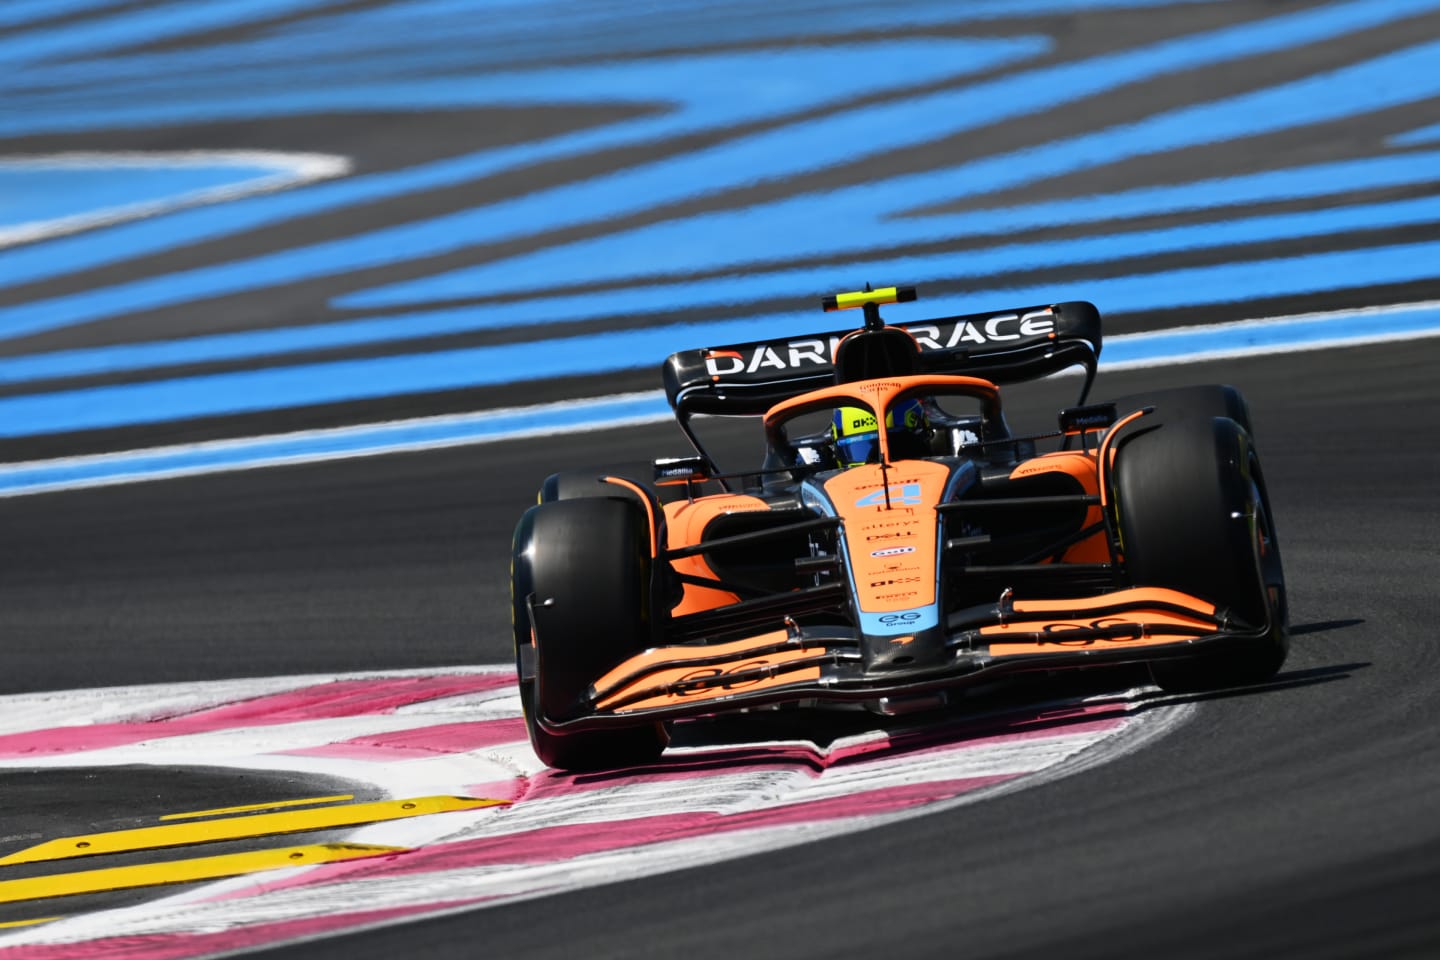 LE CASTELLET, FRANCE - JULY 22: Lando Norris of Great Britain driving the (4) McLaren MCL36 Mercedes on track during practice ahead of the F1 Grand Prix of France at Circuit Paul Ricard on July 22, 2022 in Le Castellet, France. (Photo by Dan Mullan/Getty Images)